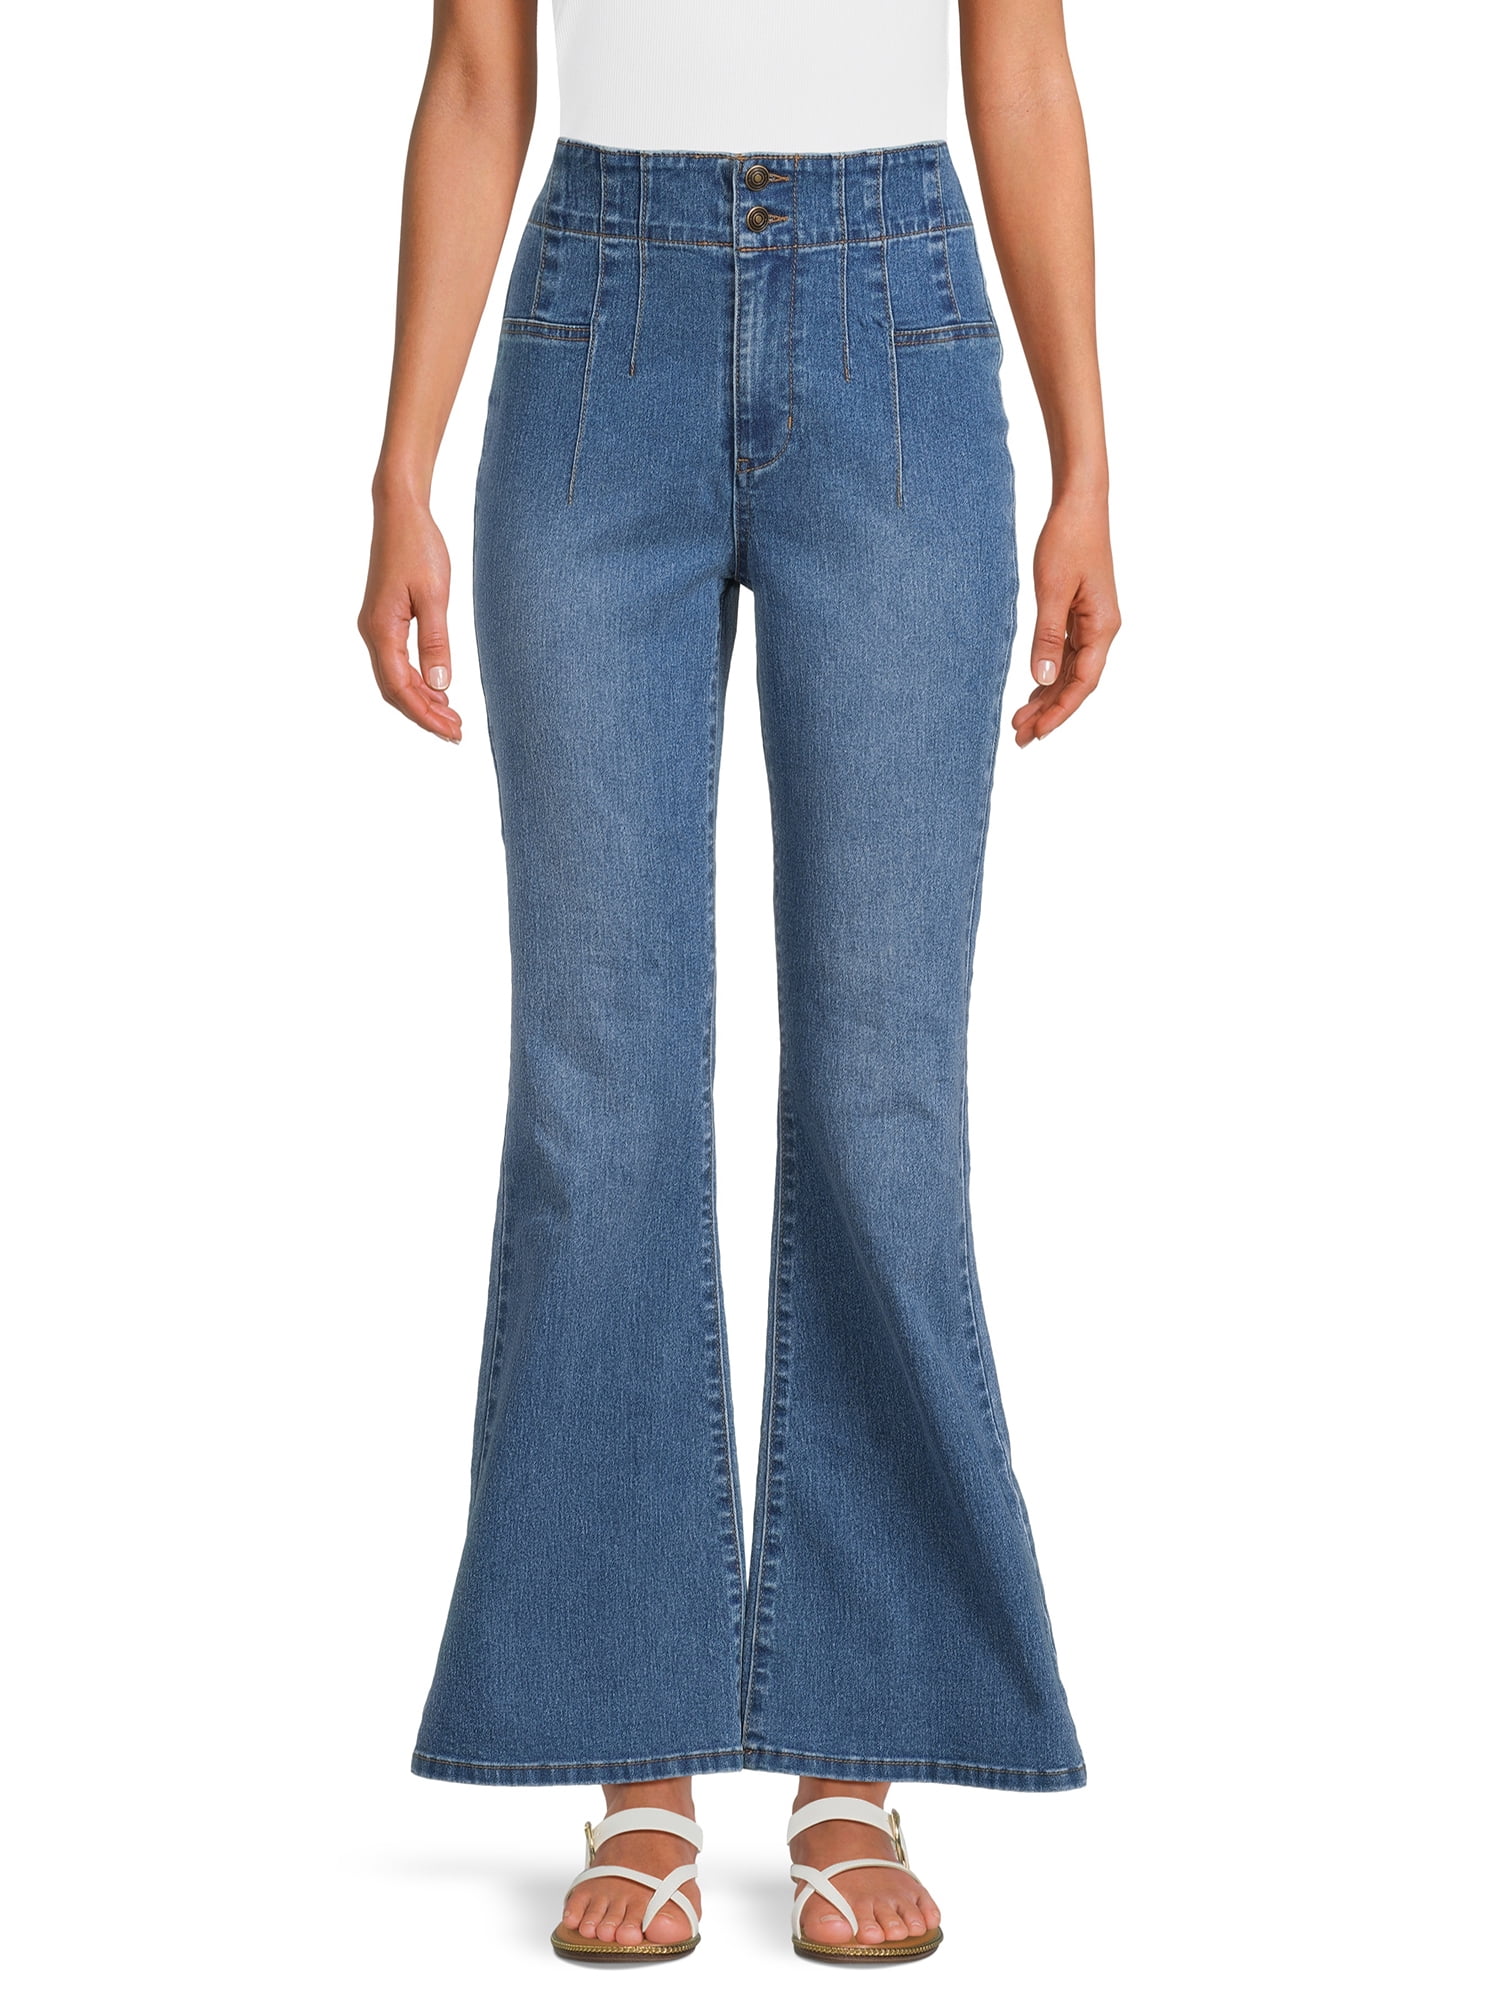 WEST OF MELROSE Womens Corduroy Flare Pants - ShopStyle